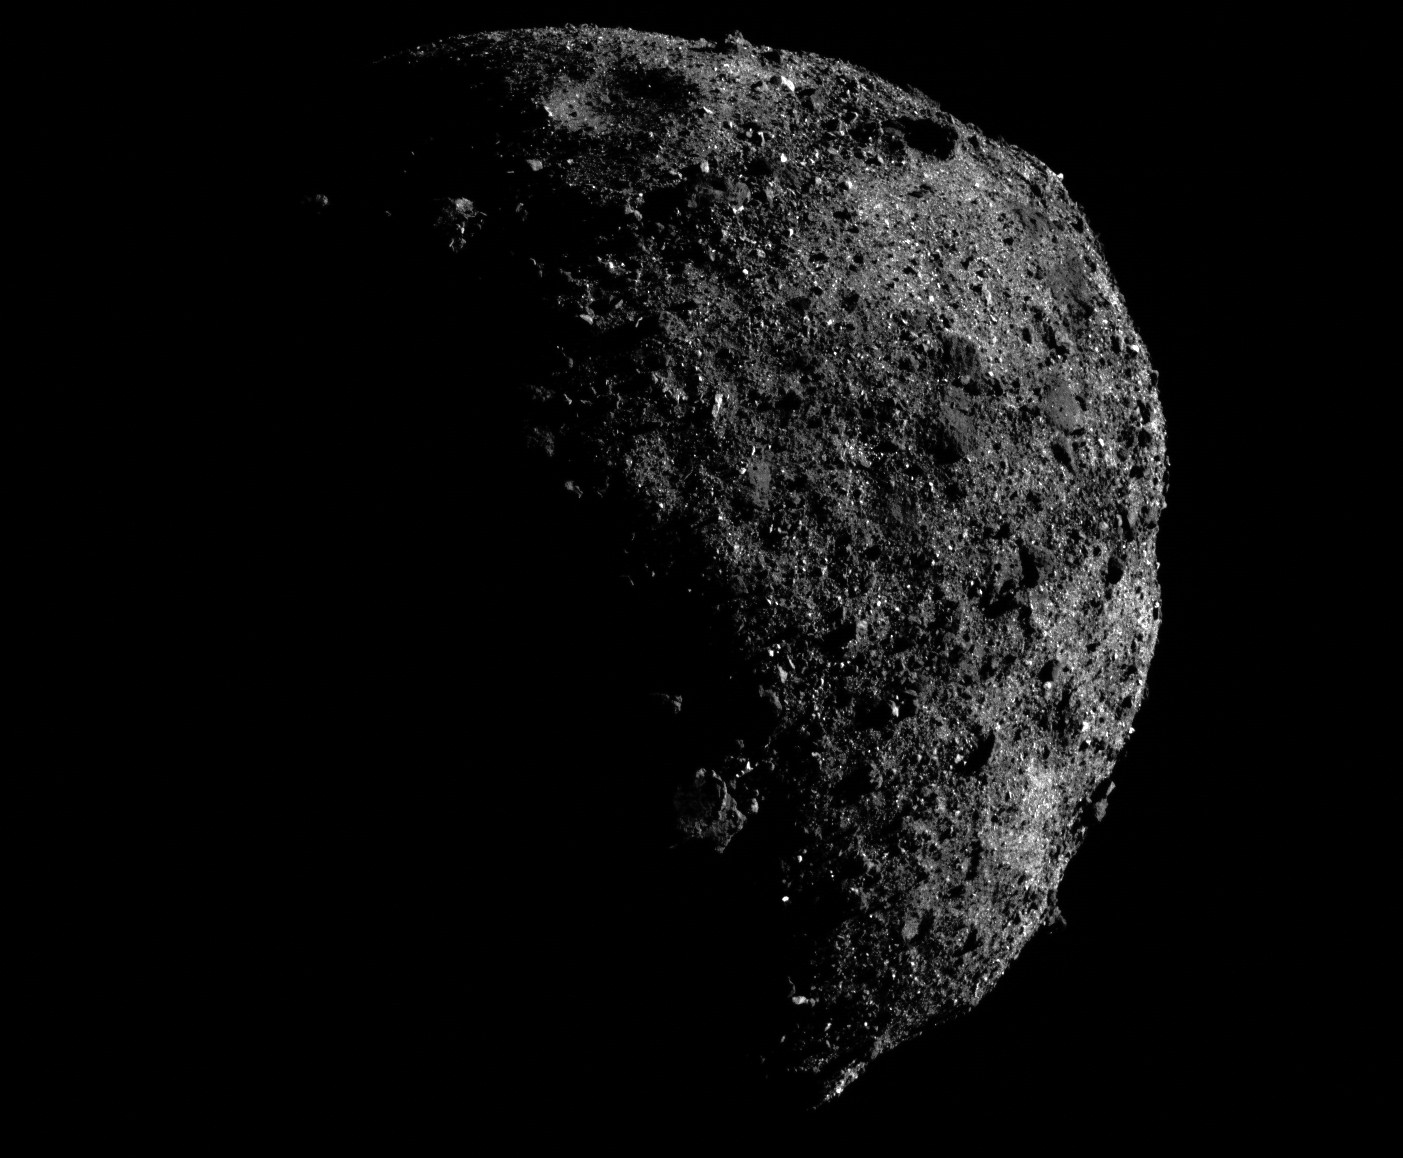 What do we need to stop an asteroid from hitting Earth? Of time! 